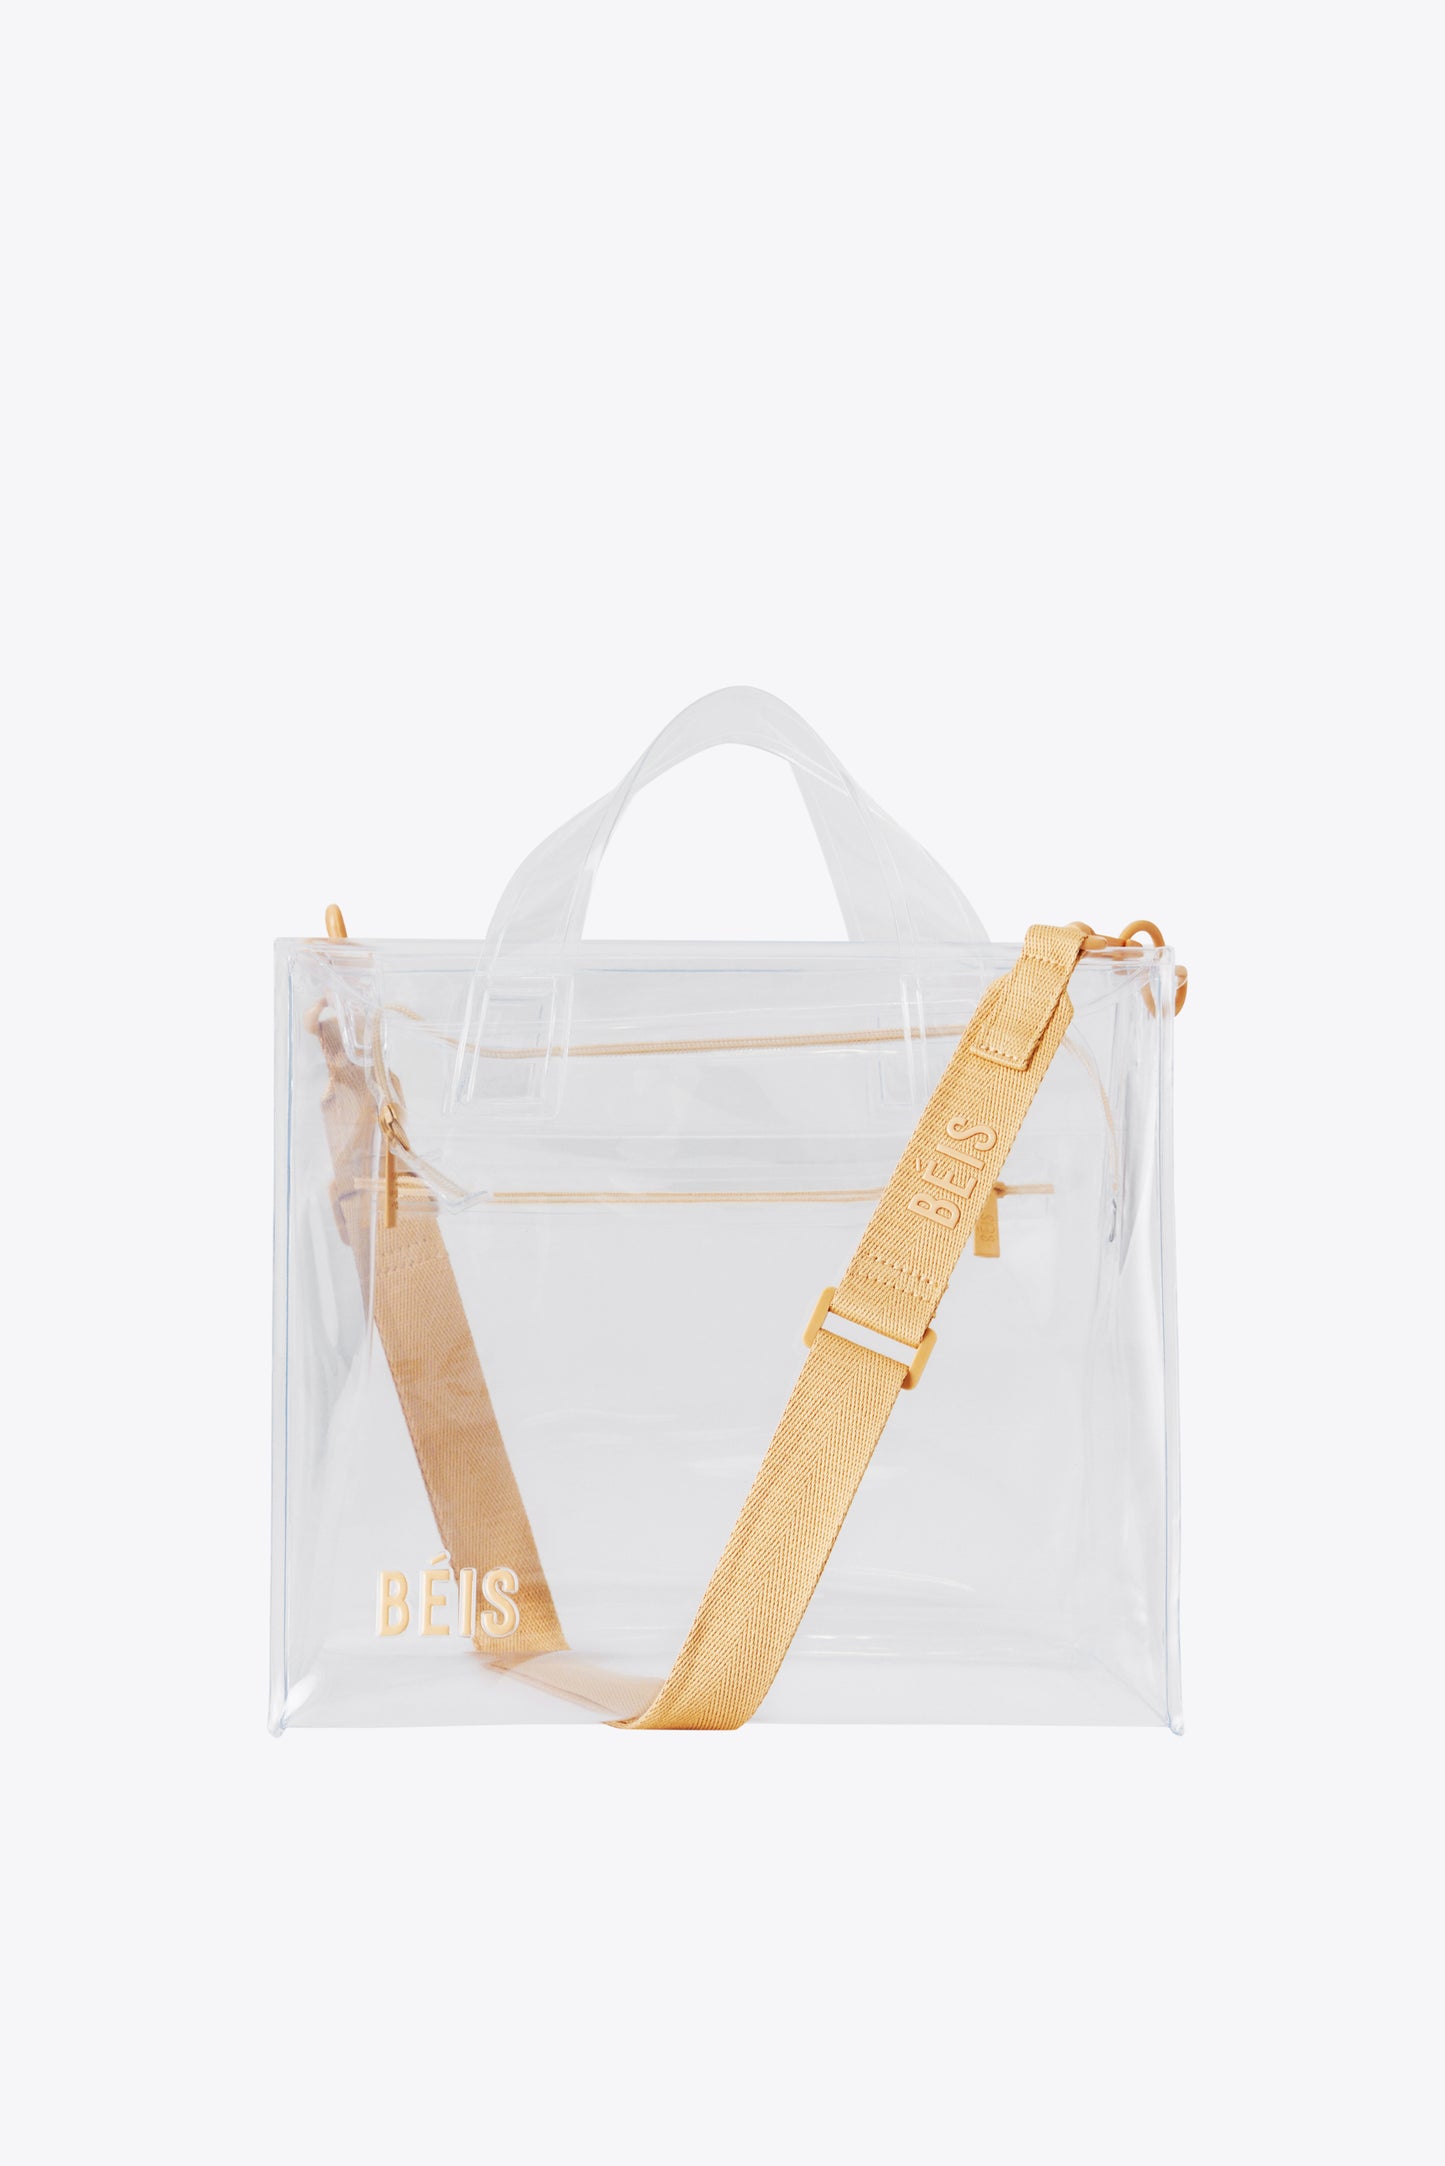 The Stadium Tote in Clear